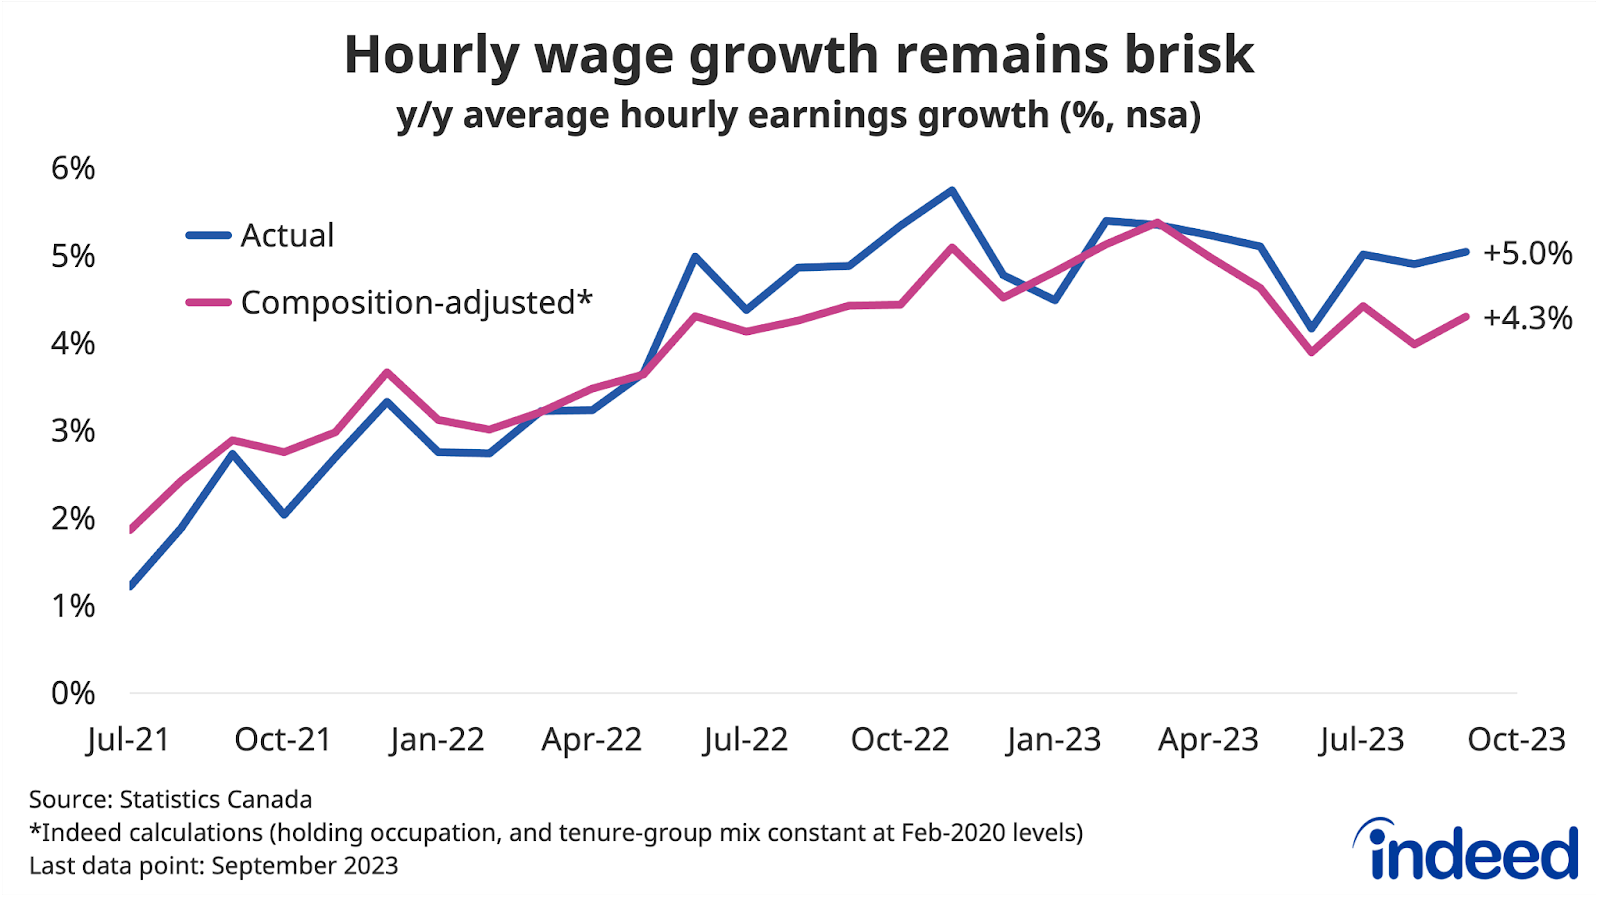 Line graph titled “Hourly wage growth remains brisk” shows the year-over-year growth of average and composition-adjusted hourly wages between July 2021 and September 2023. Overall average wage growth came in at an elevated 5.0% in September, still well above its pace in early 2022.